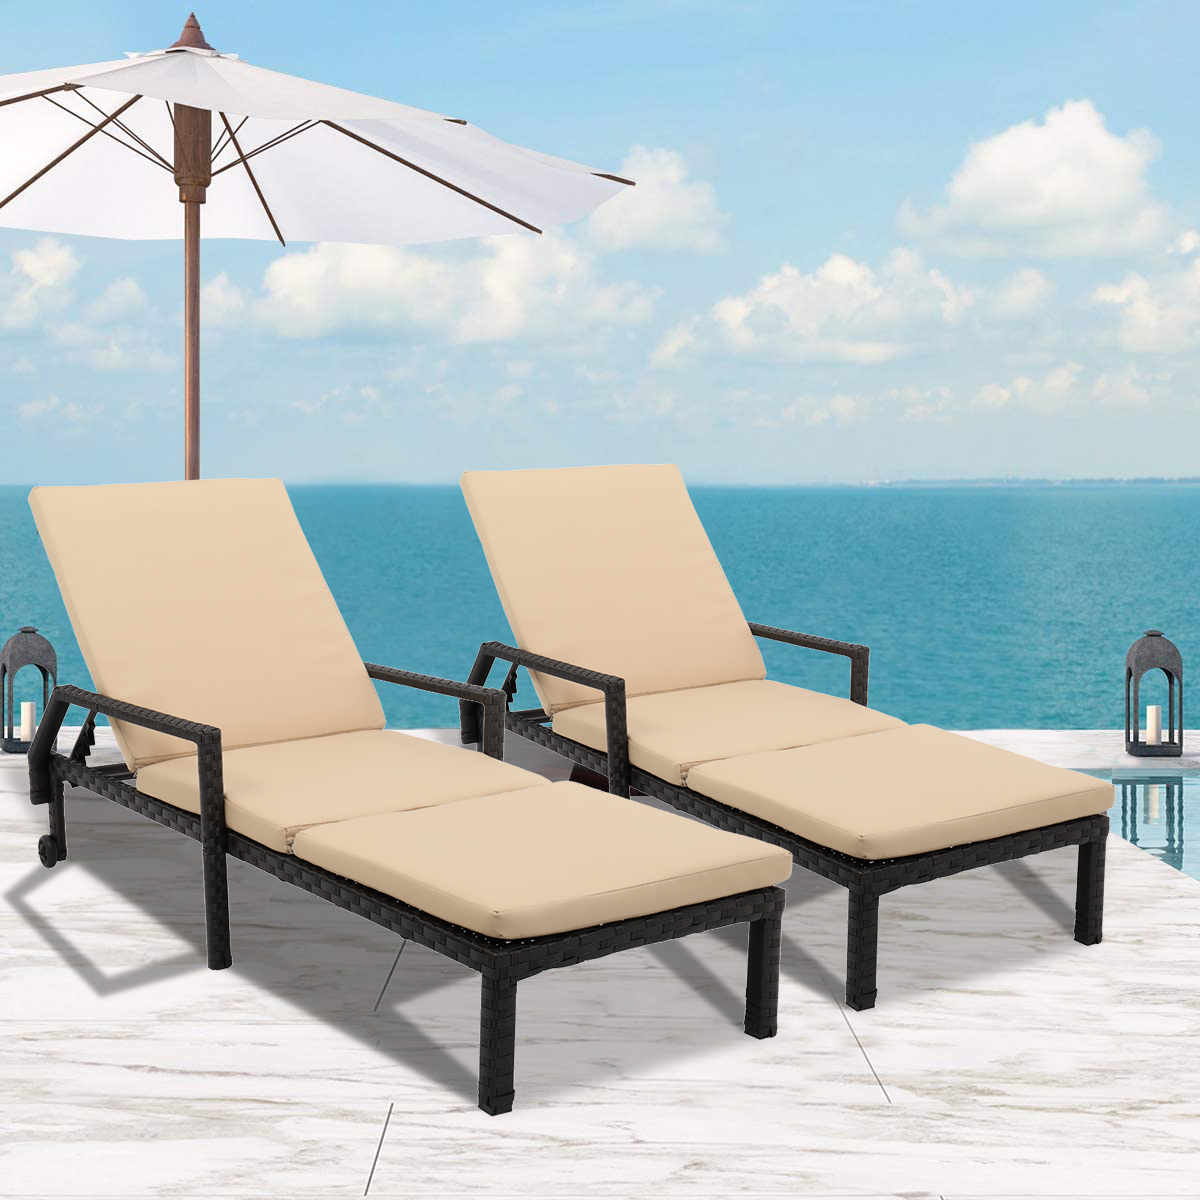 2PCS Chaise Lounge Chairs, BTMWAY Outdoor Chaise Lounge with Beige Cushion, Wicker Lounge Chair Set, Adjustable Patio Chaise Lounge Chair with Wheels, Patio Furniture Recliner for Deck Poolside Beach - image 1 of 13